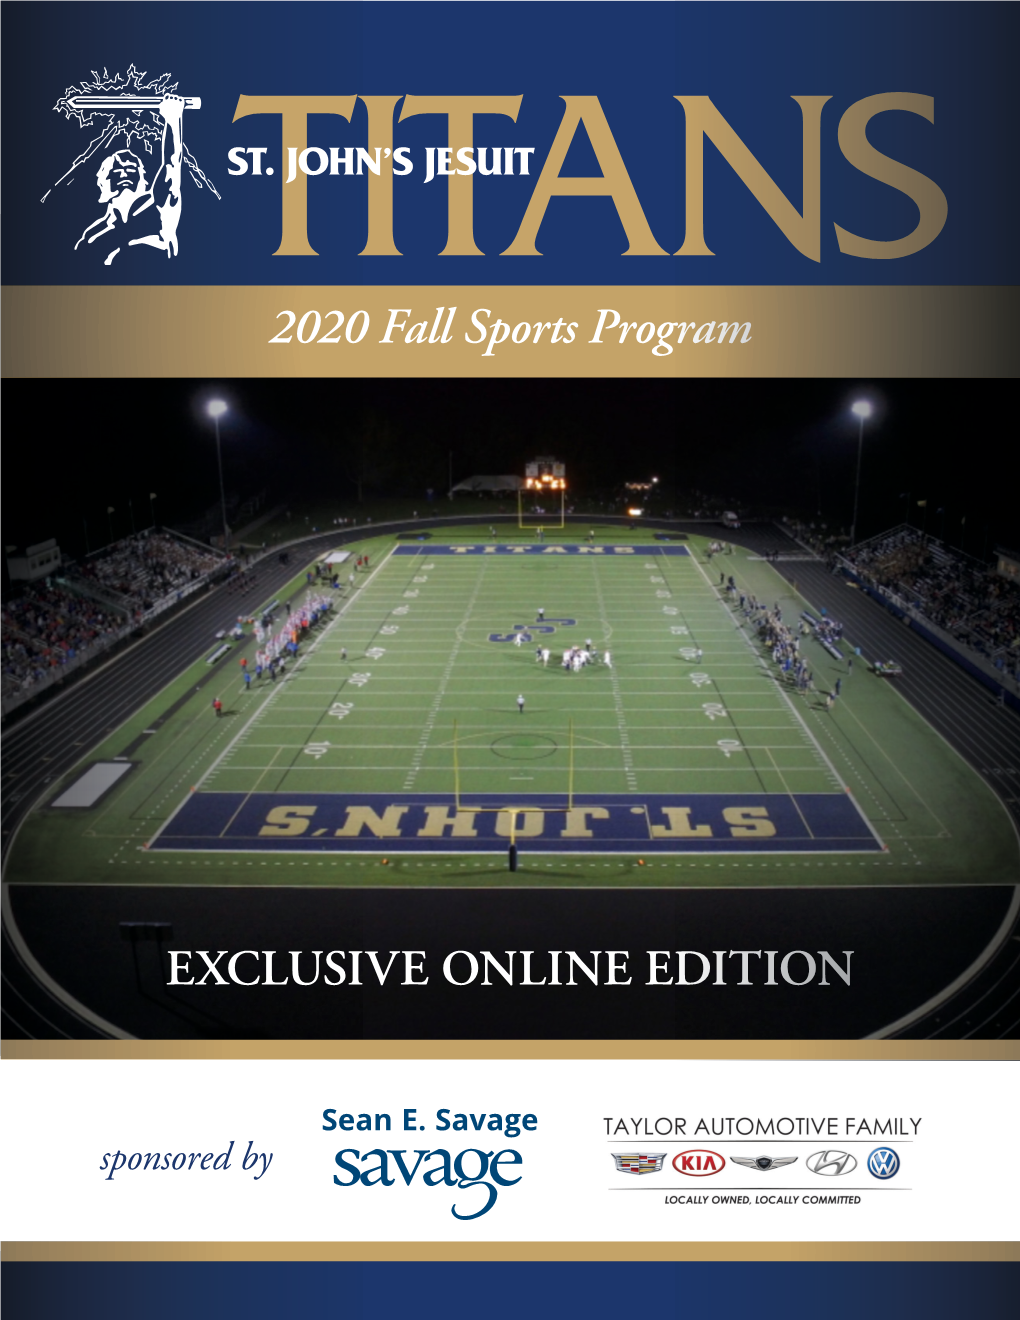 2020 Fall Sports Program EXCLUSIVE ONLINE EDITION